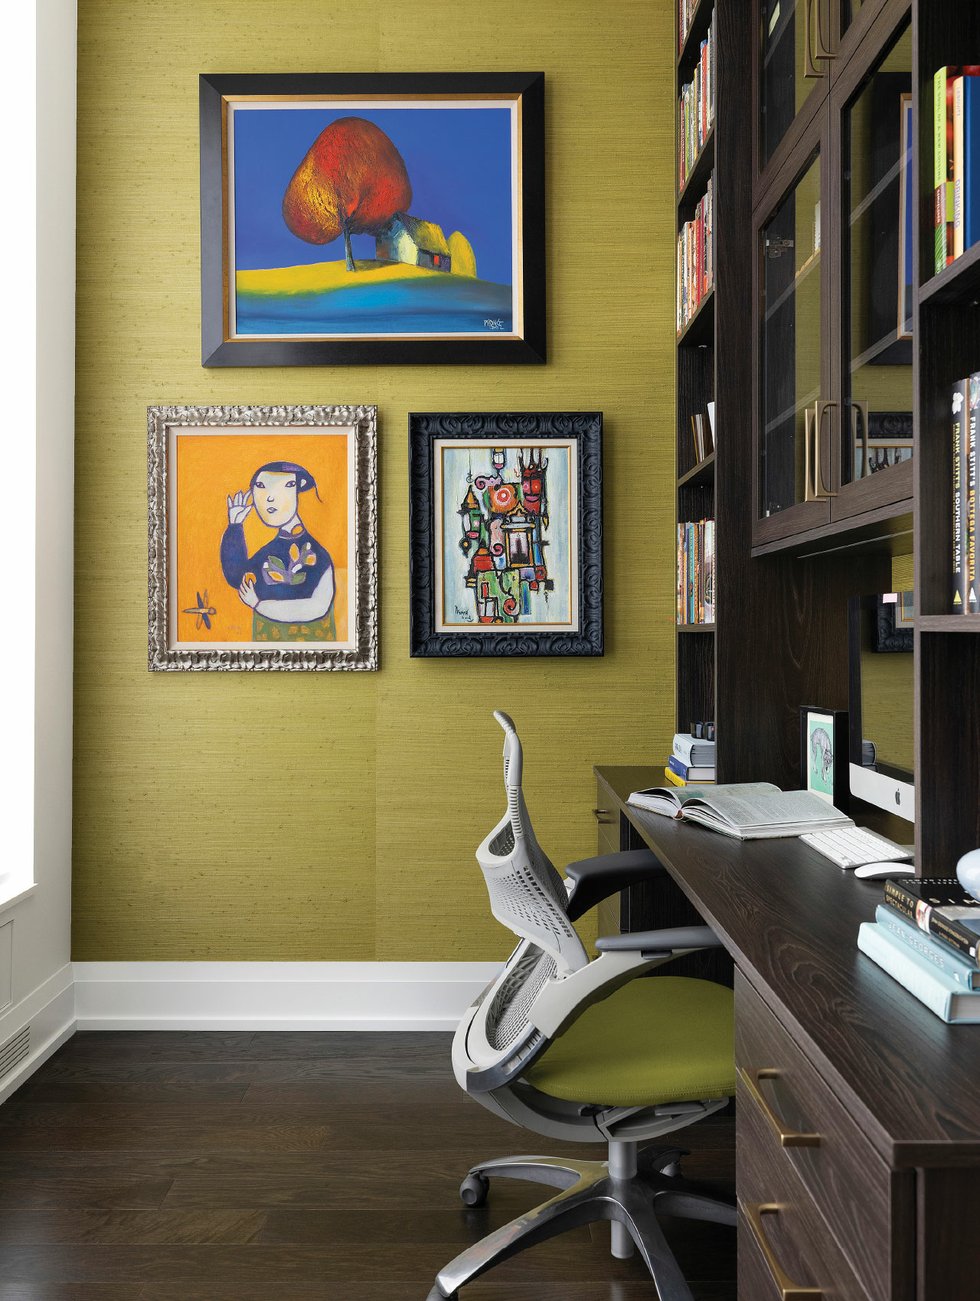 To maximize the impact of the backdrop, designer Kelly Perry deliberately made sure not to match the “pea-soup green” grass cloth wall covering with colors from a trio of paintings, two from Vietnam and one (the smallest) from Cambodia.